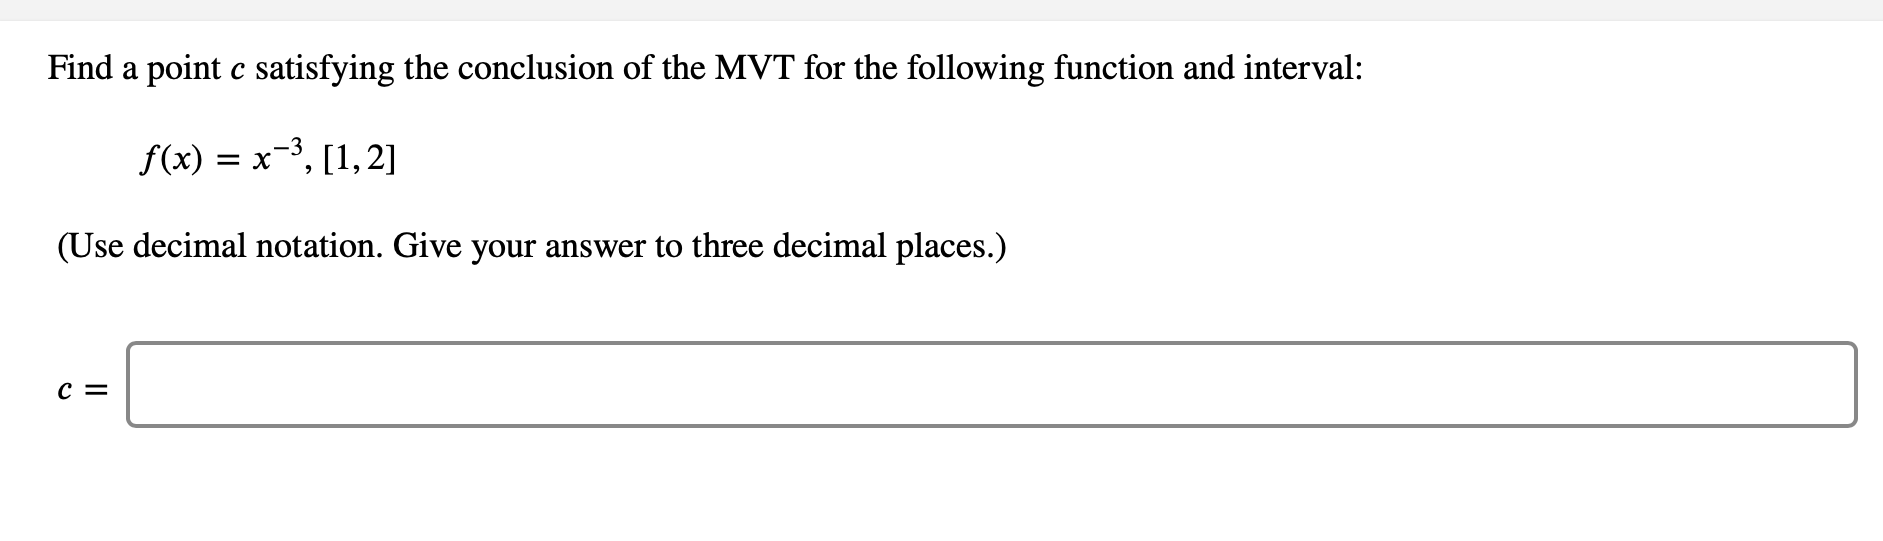 Find a point c satisfying the conclusion of the MVT for the following function and interval:
f(x) = x-3, [1,2]
(Use decimal notation. Give your answer to three decimal places.)
c =
